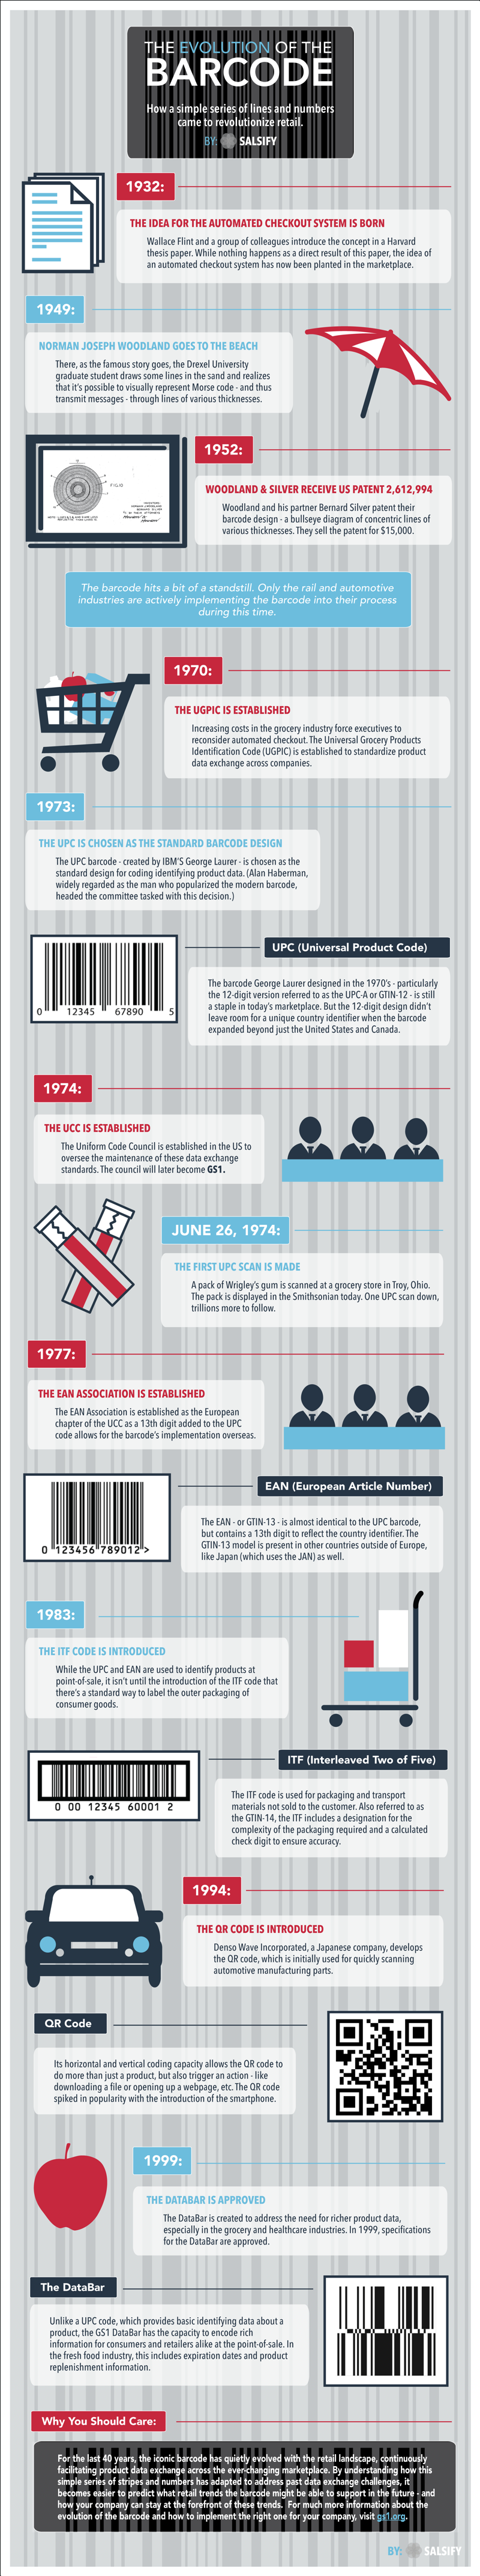 history-of-the-barcode-infographic